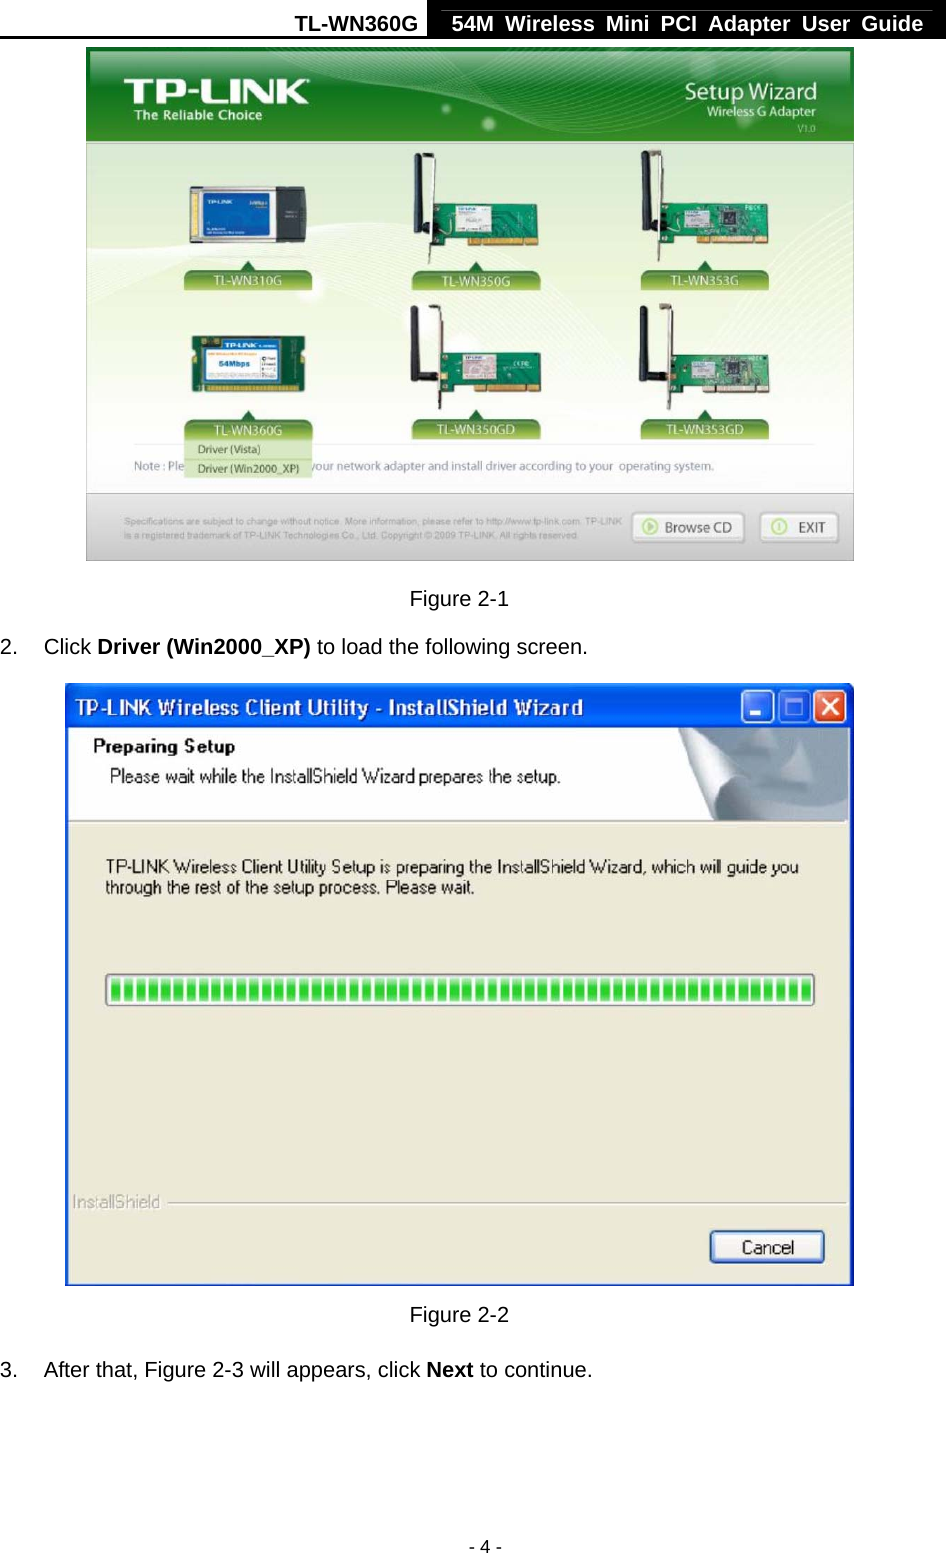 TL-WN360G 54M Wireless Mini PCI Adapter User Guide  - 4 - Figure 2-1 2. Click Driver (Win2000_XP) to load the following screen.  Figure 2-2 3. After that, Figure 2-3 will appears, click Next to continue. 